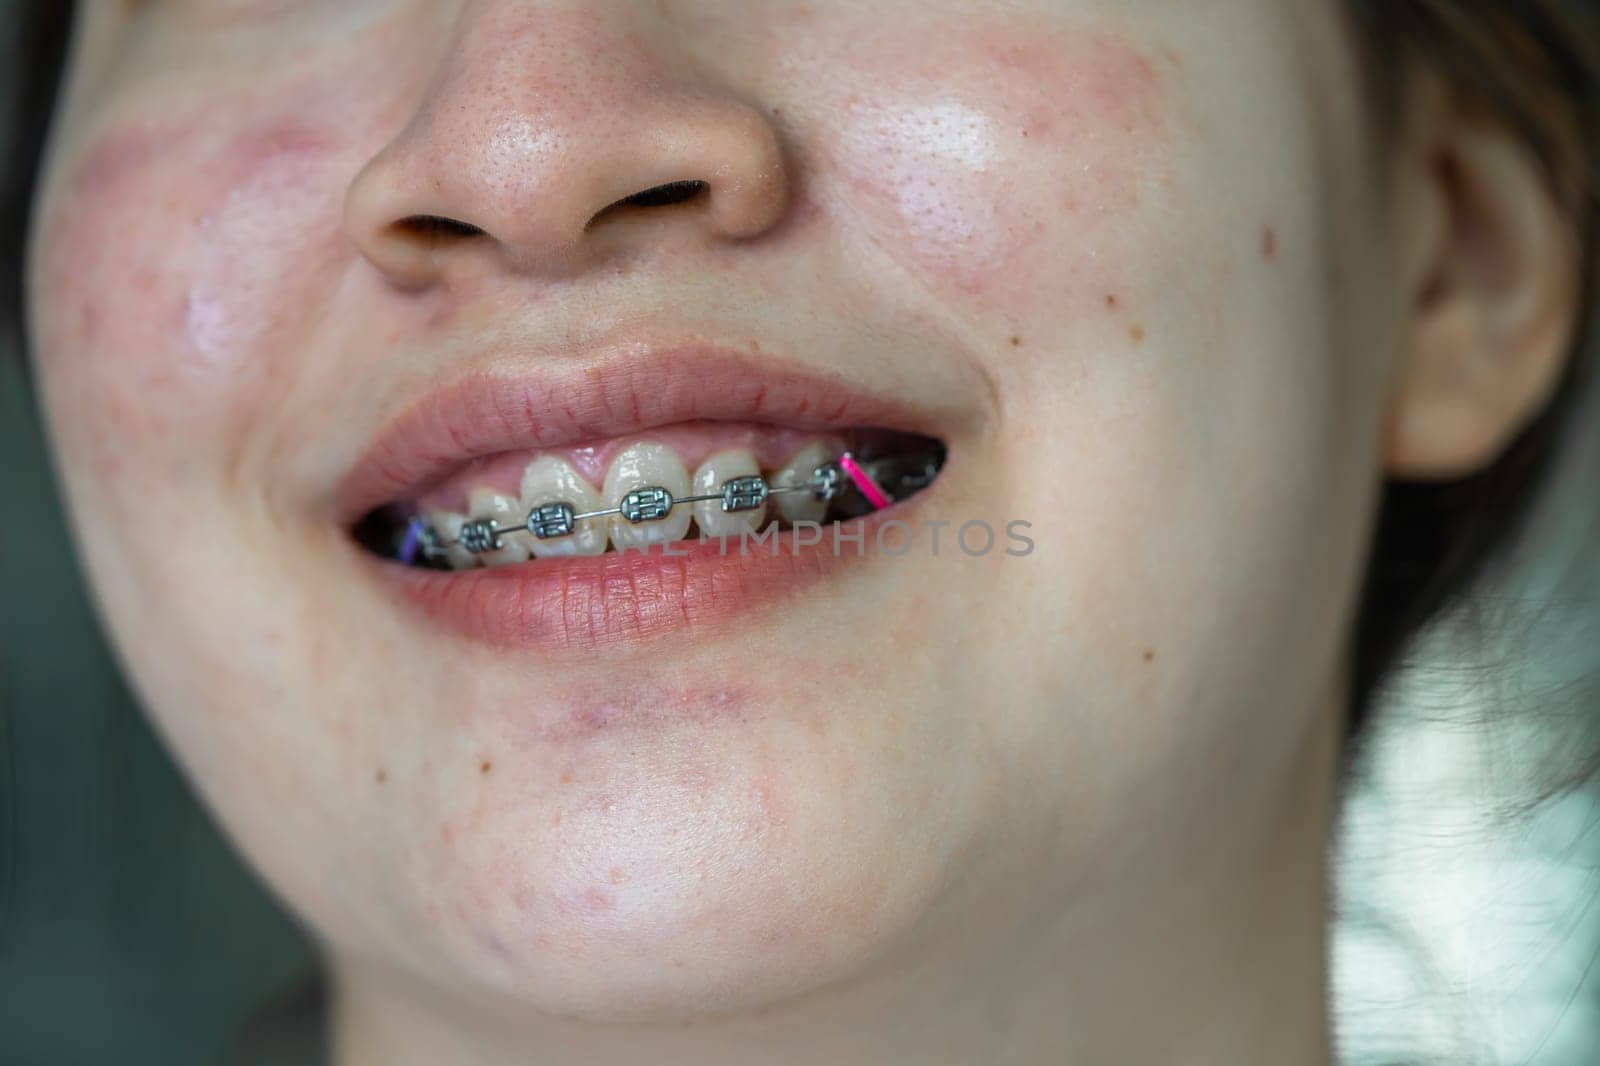 Braces in teenage girl mouth to treat and beauty for increase confidence and good personality.